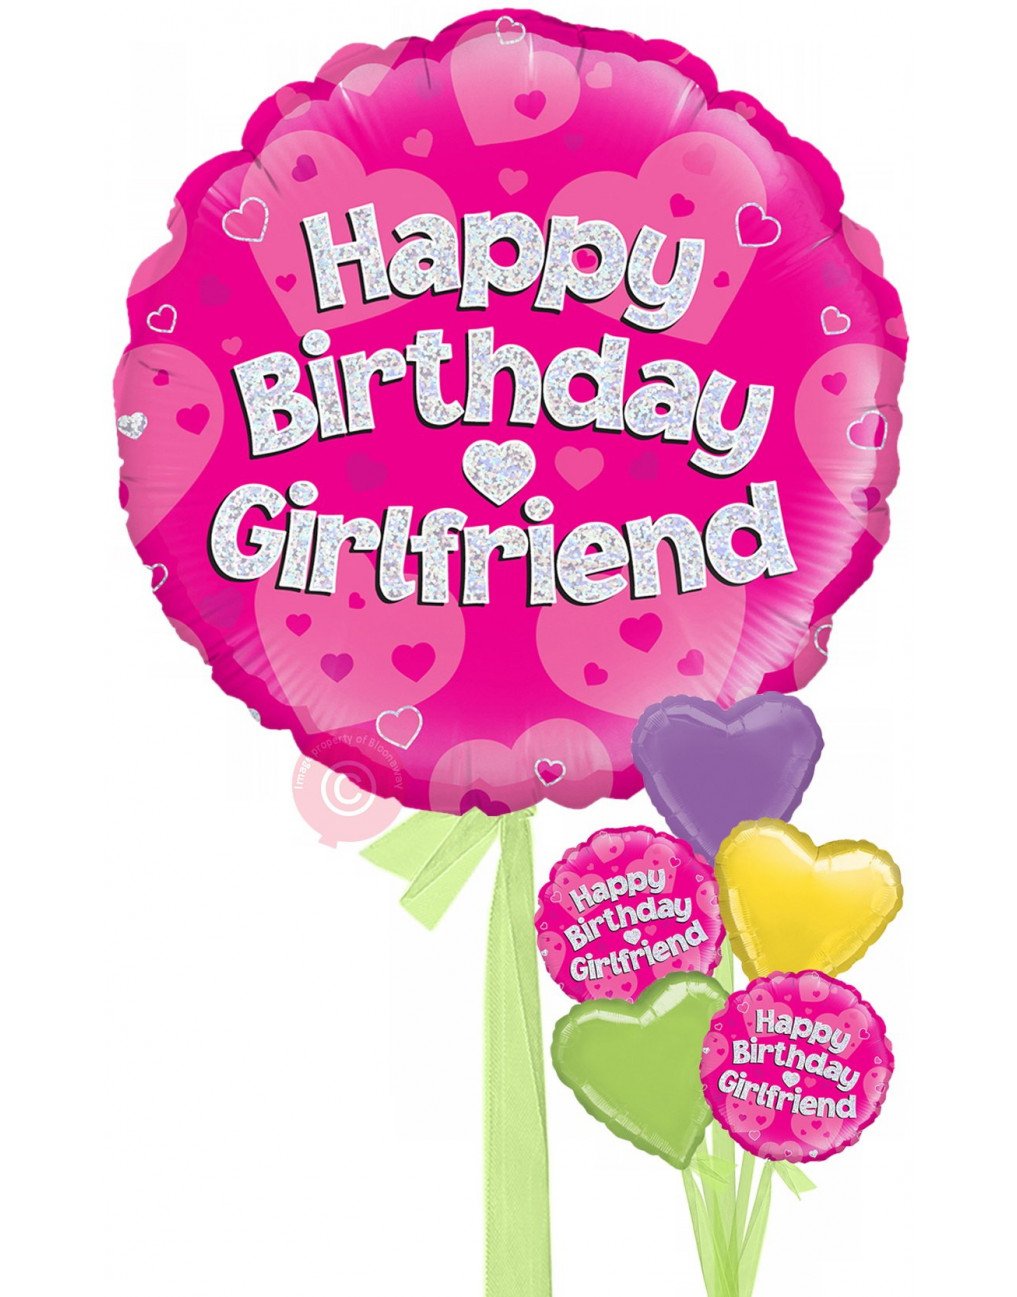 girlfriend-birthday-cards-greetings-wishes-and-images